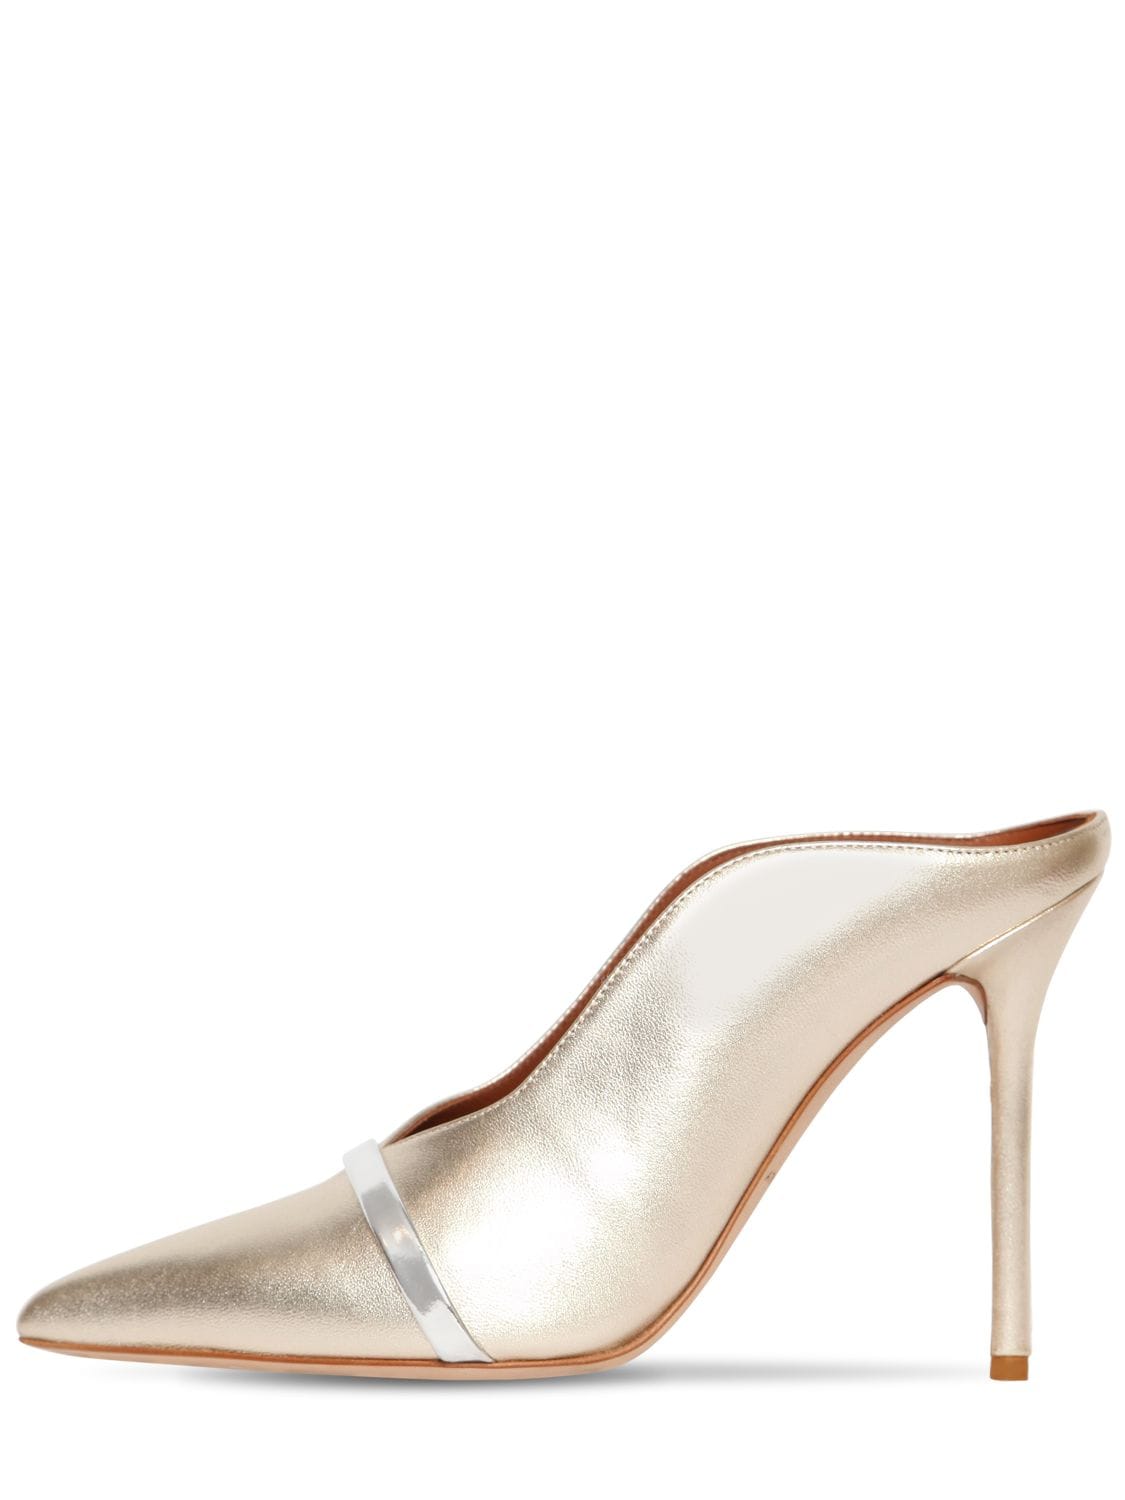 MALONE SOULIERS 100MM CONSTANCE METALLIC LEATHER MULES,70II7R007-UEXBVELOTY9TSUXWRVI1